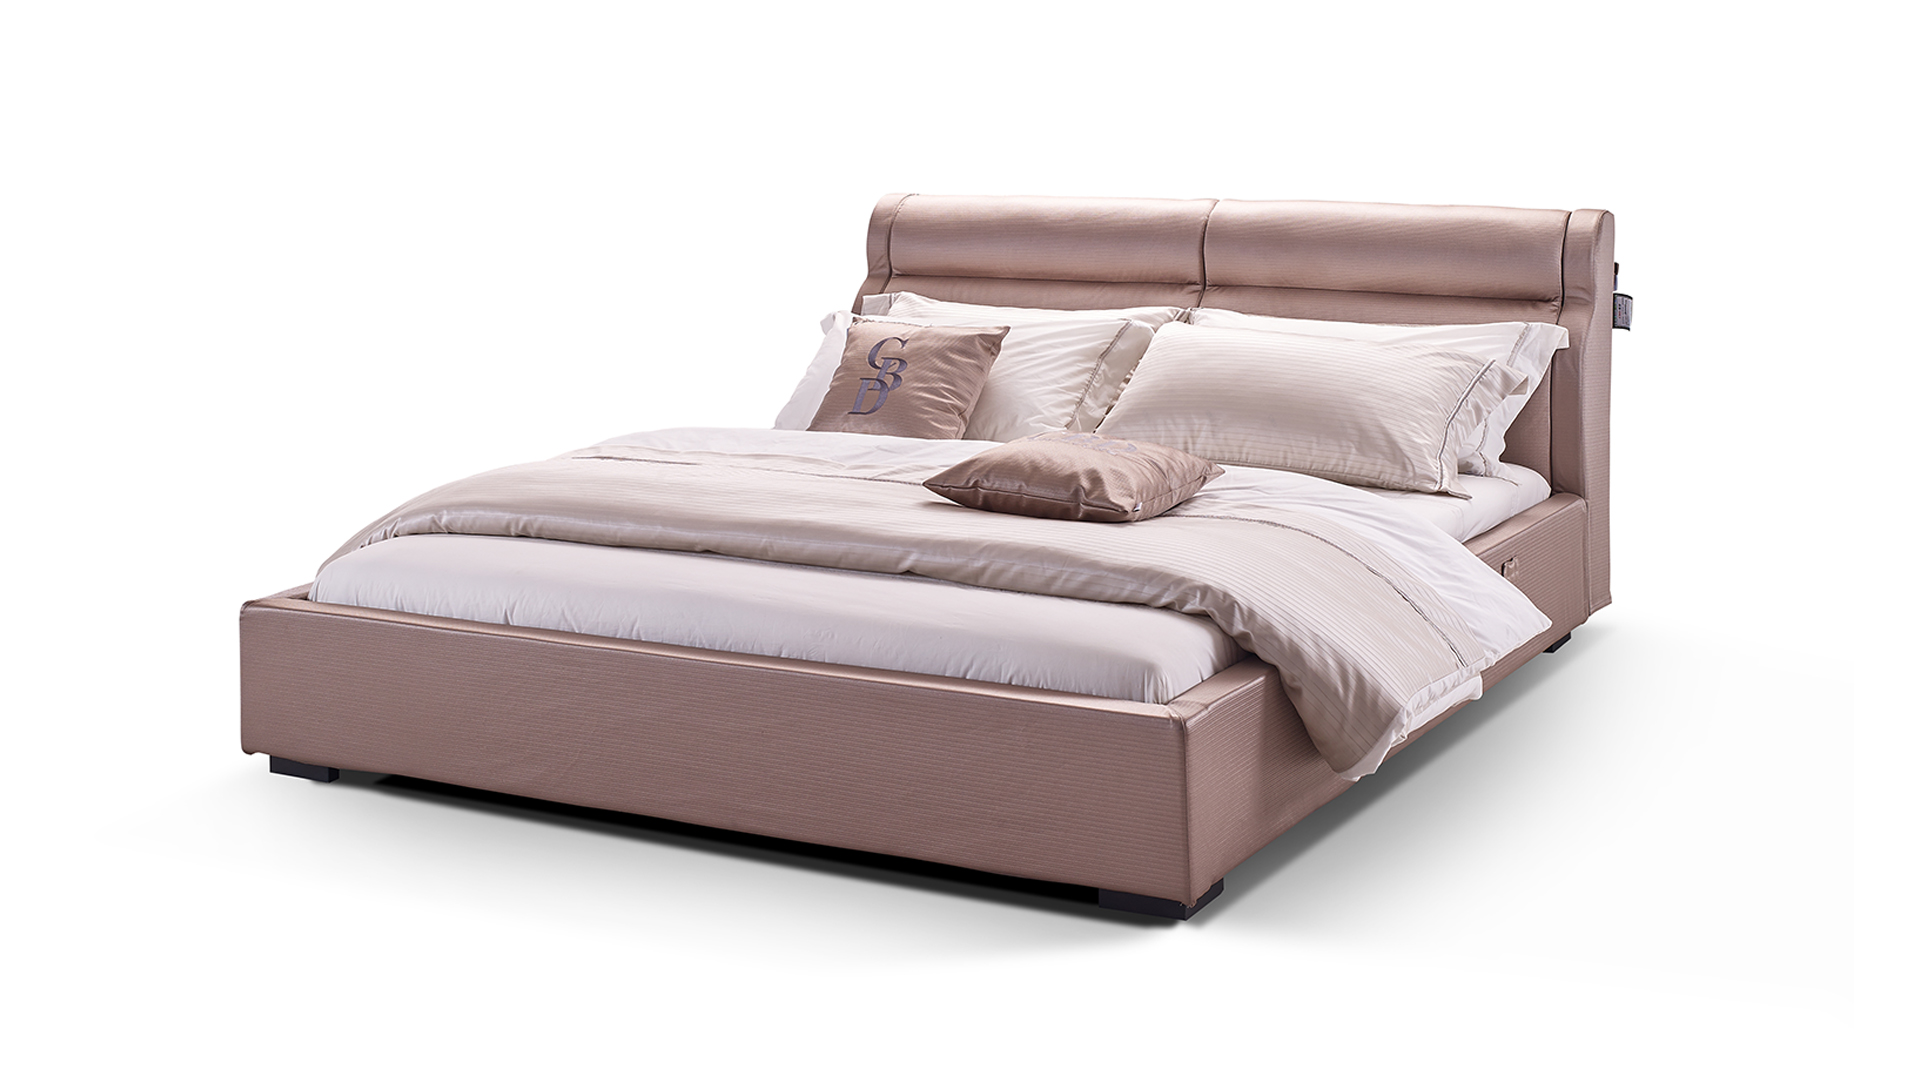 <p><strong>description：</strong></p><p>*bedframe with the 3D slats or motion</p><p>*fashine fabric cover</p><p>*the headrest can support your neck and waist perfectly&nbsp;</p><p>*Well matched the mattress and bedding.</p><p><br/></p>